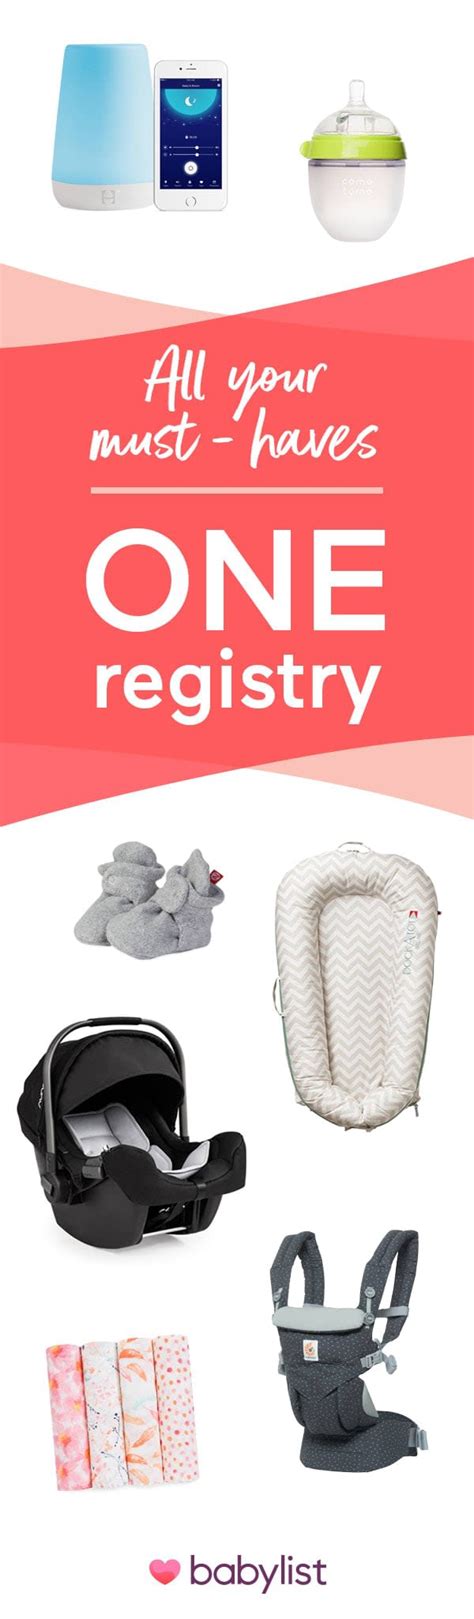 Under $50. $50 to $100. $100+. Stores. *Restrictions may apply. Not all products are eligible. Handling and location surcharges may apply. Visit Jenna Smentek and Josh Smentek ’s Baby Registry on Babylist. To raise a child it takes a village..